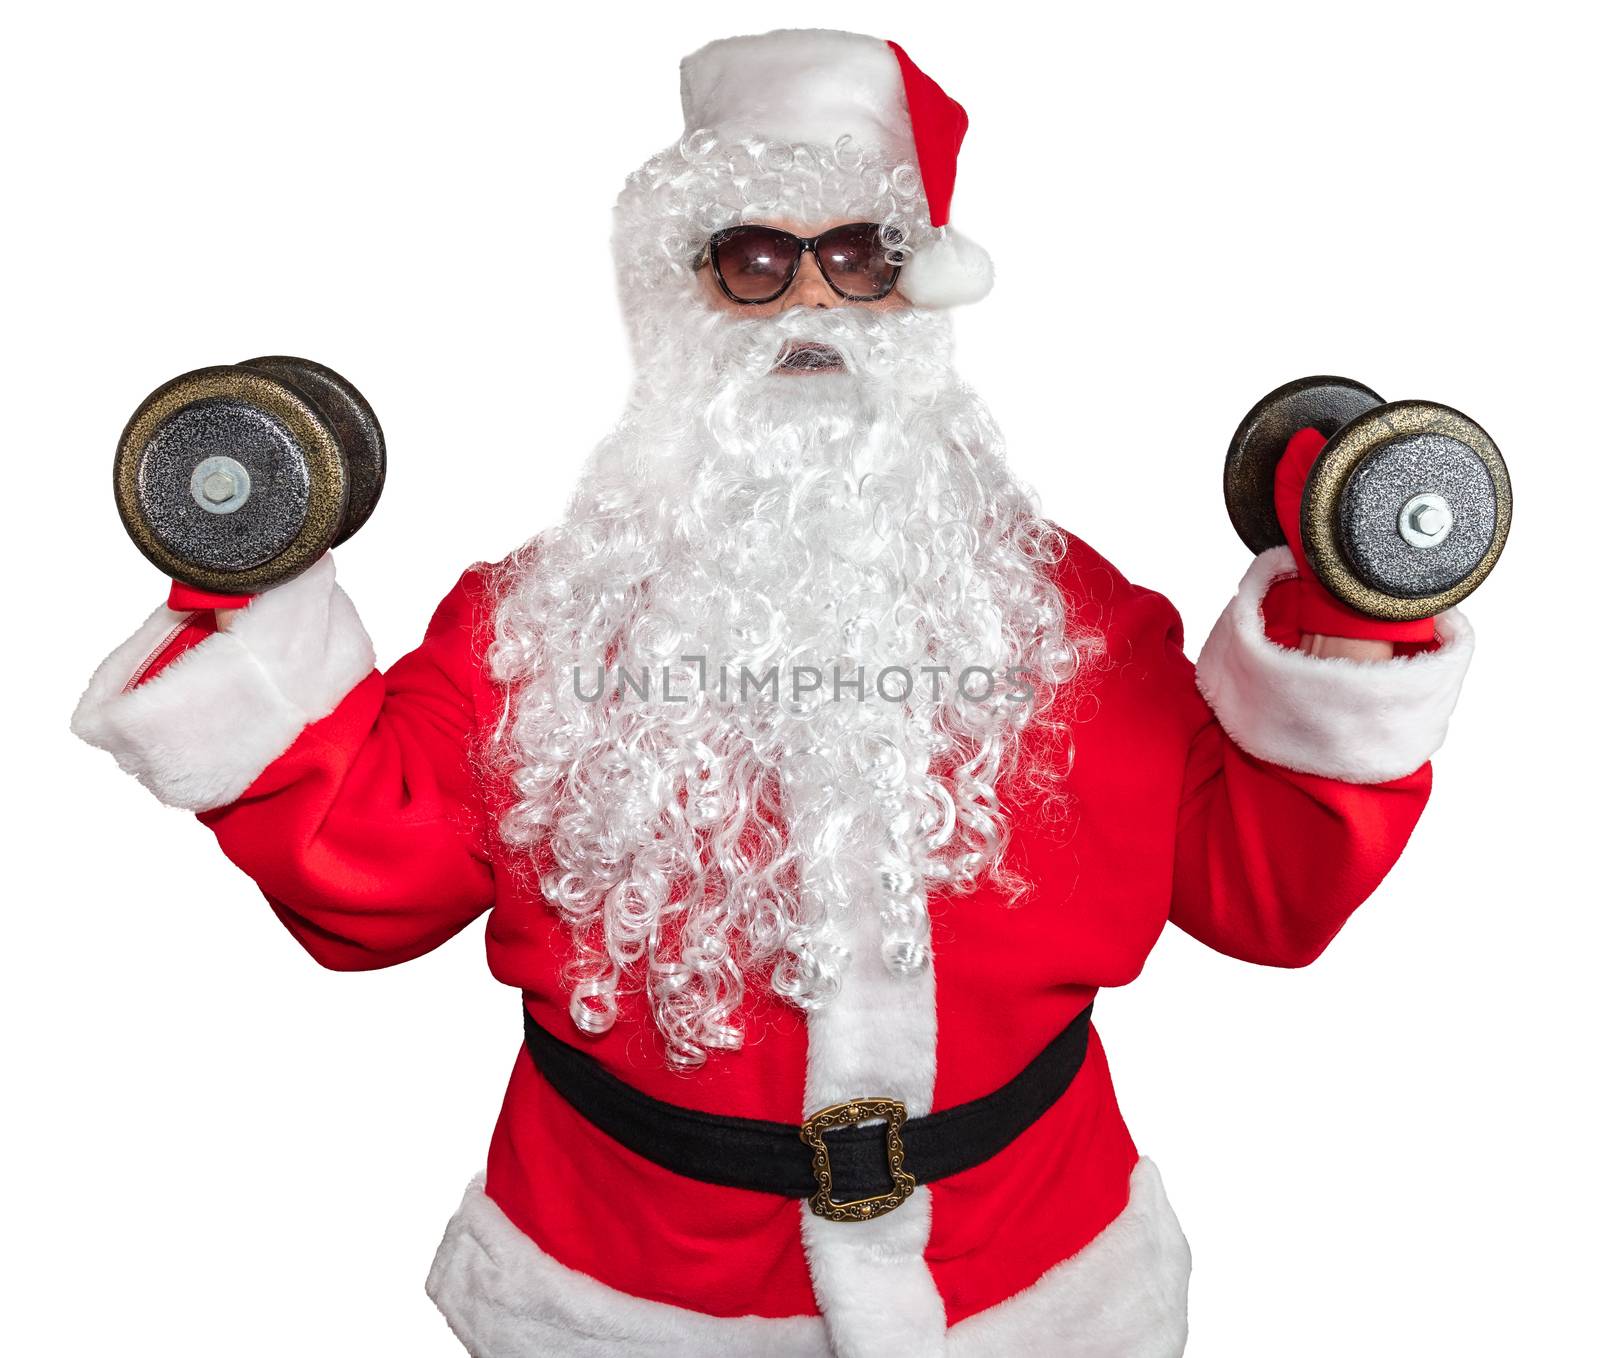 Santa Claus working out and pushing two dumbbells up in the air. Santa wearing sunglasses and a long white beard. Isolated on white background by DamantisZ